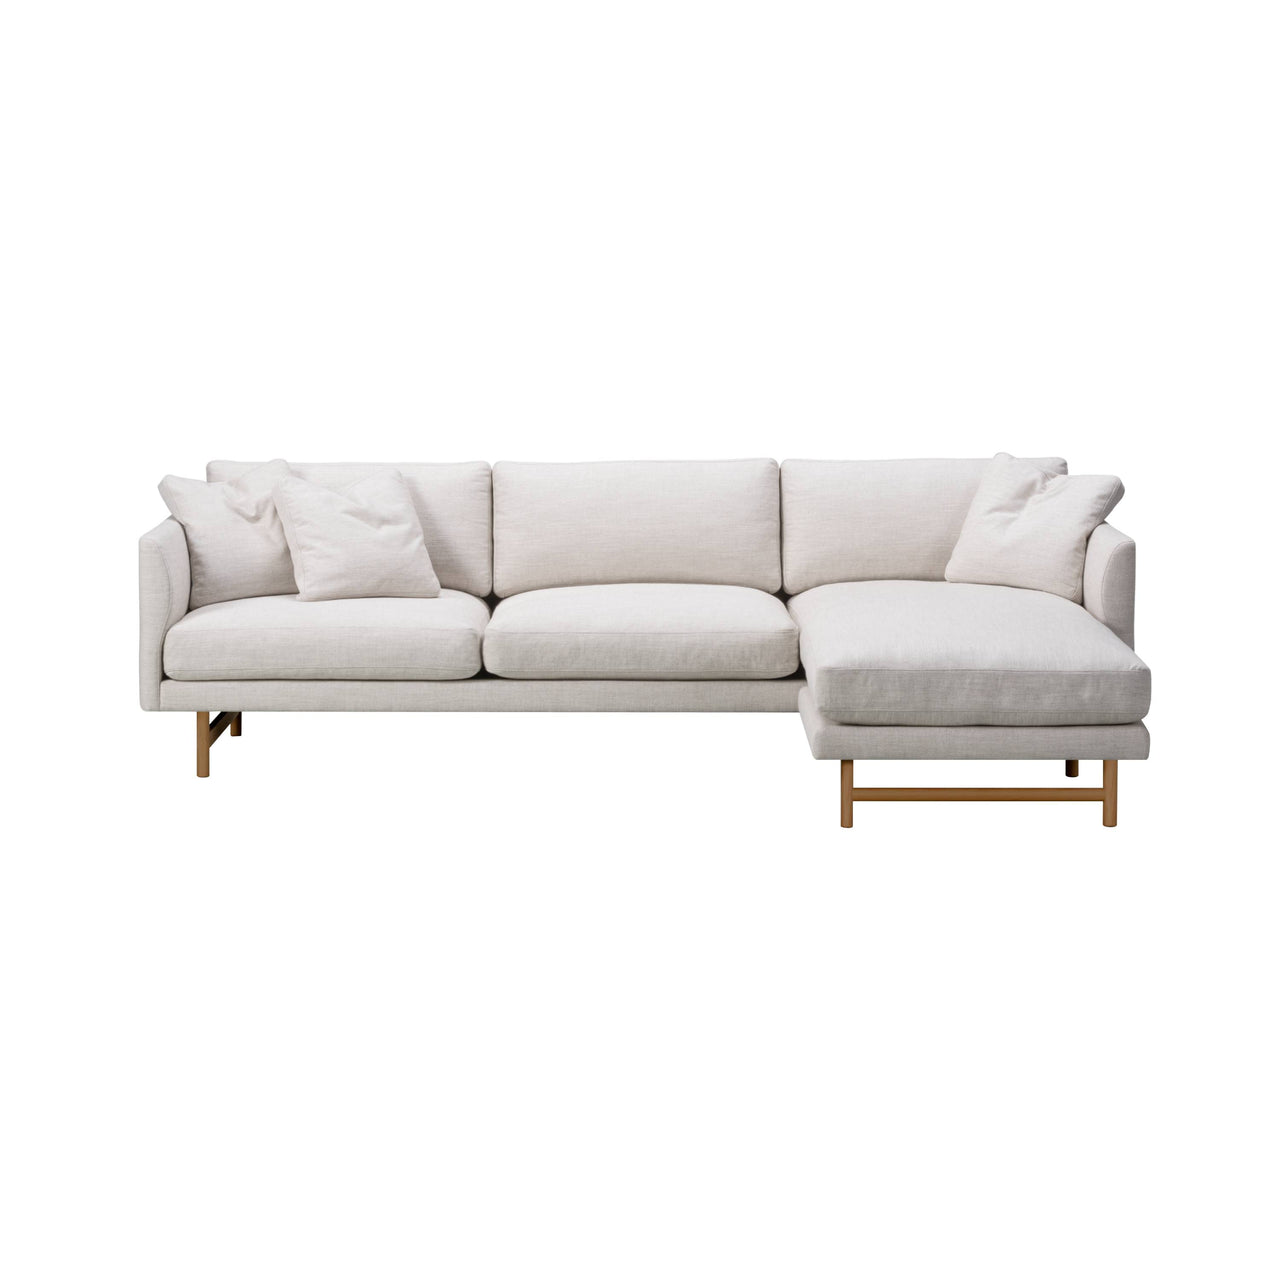 Calmo 3 Seater Chaise: Wood Base + Small - 98.4